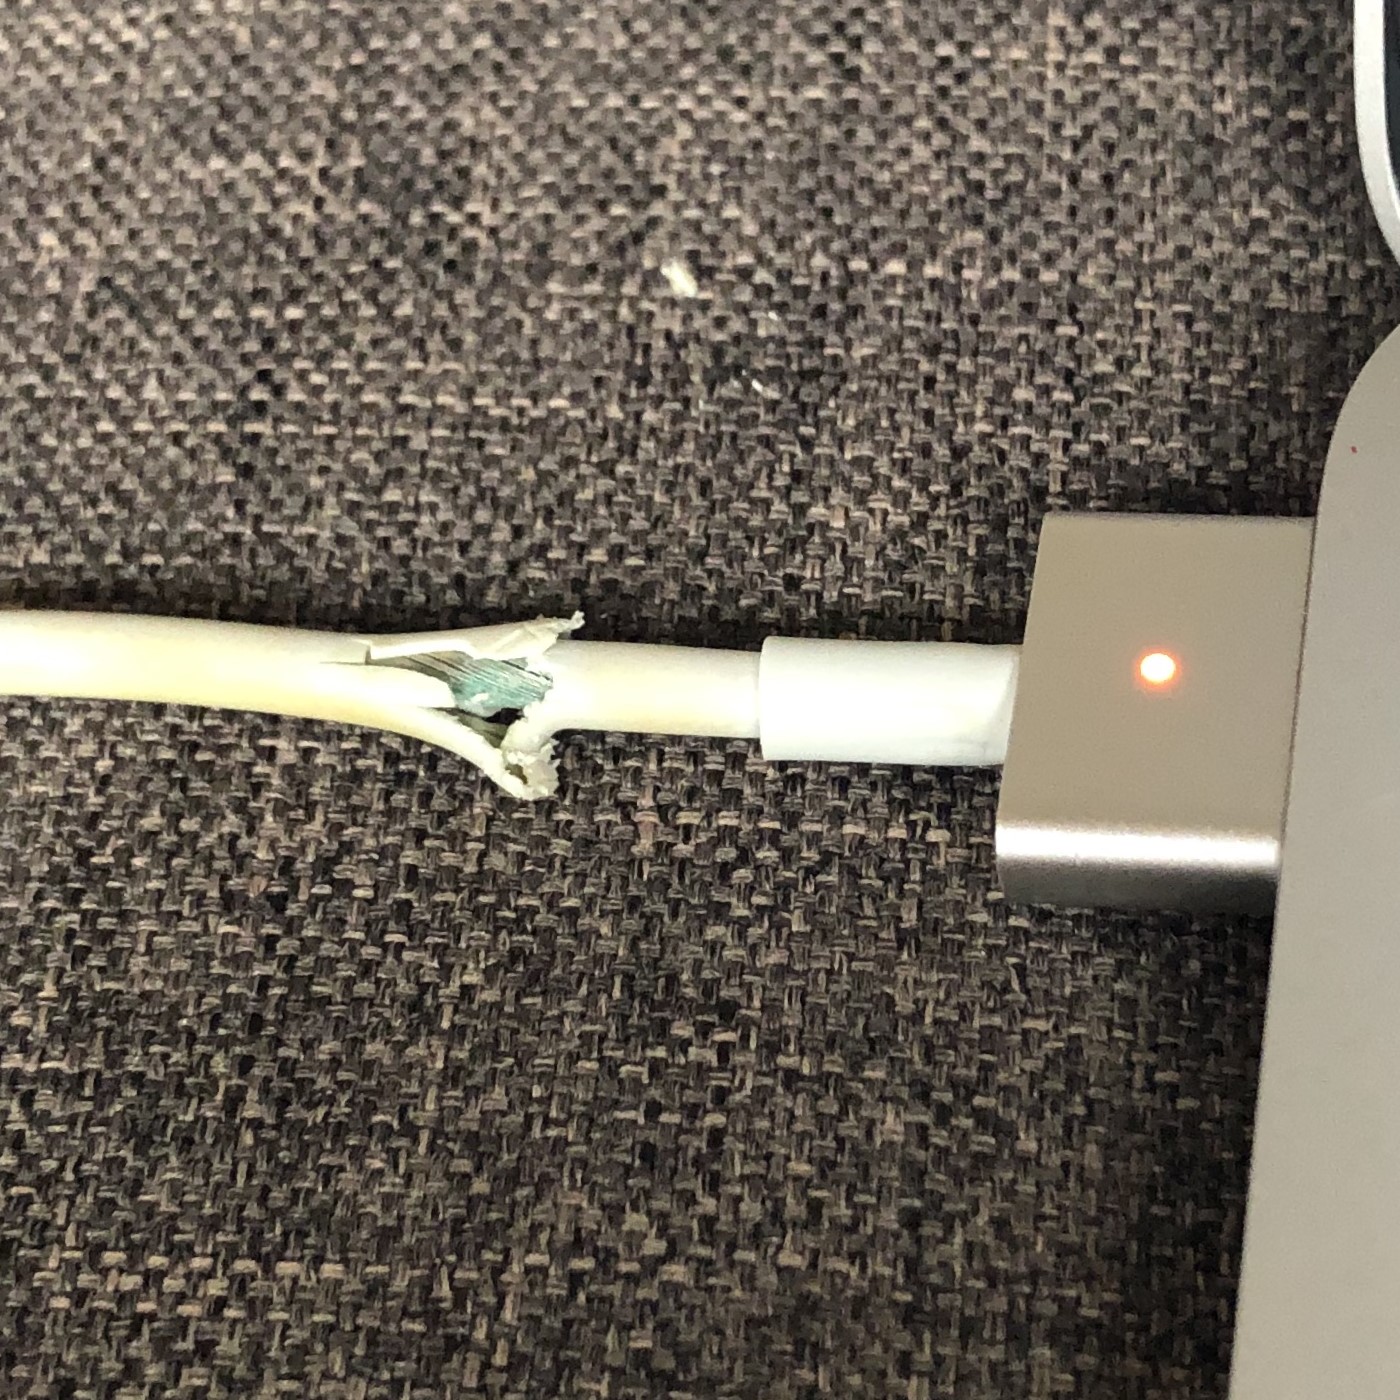 broken macbook charger exposing colored wires within